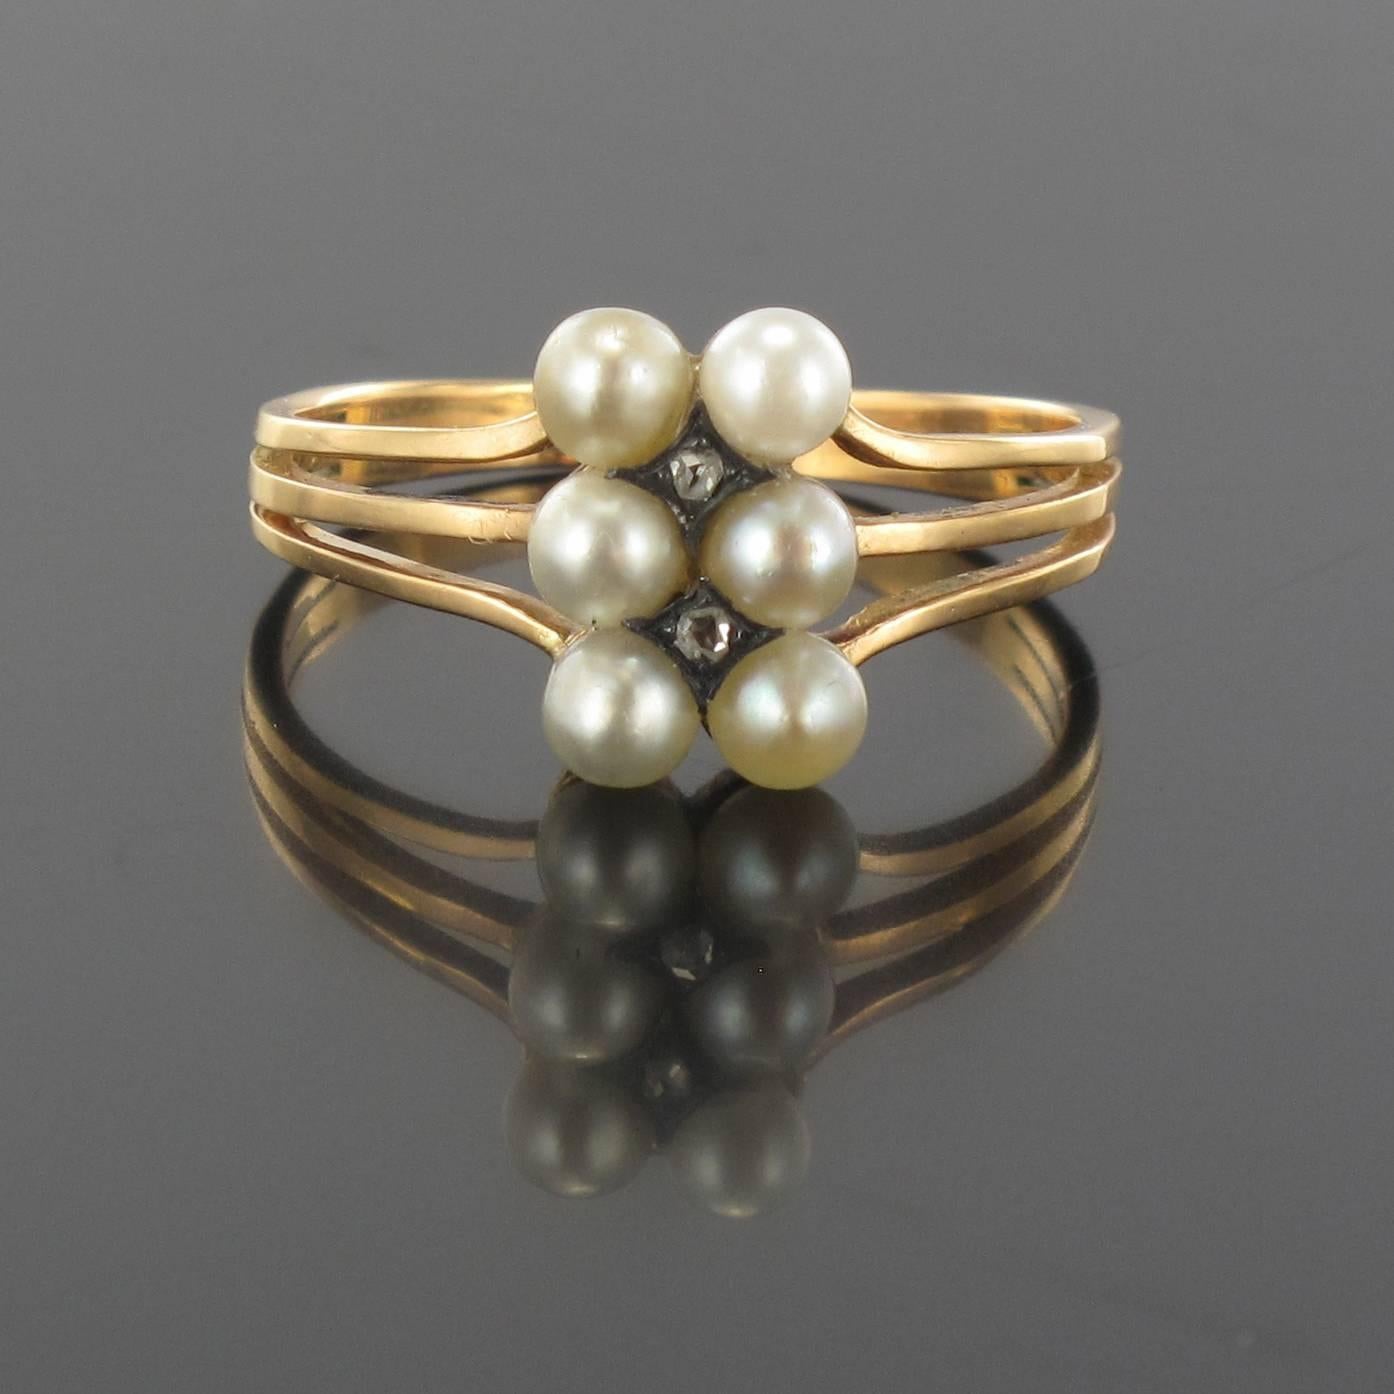 Ring in 18 carat rose gold, eagle head hallmark. 

Composed of 3 flat gold bands linked at the base and set at the front with 6 fine oriental creamy white pearls and 2 rose cut diamonds within the central triangle formed by the pearls. 

Each